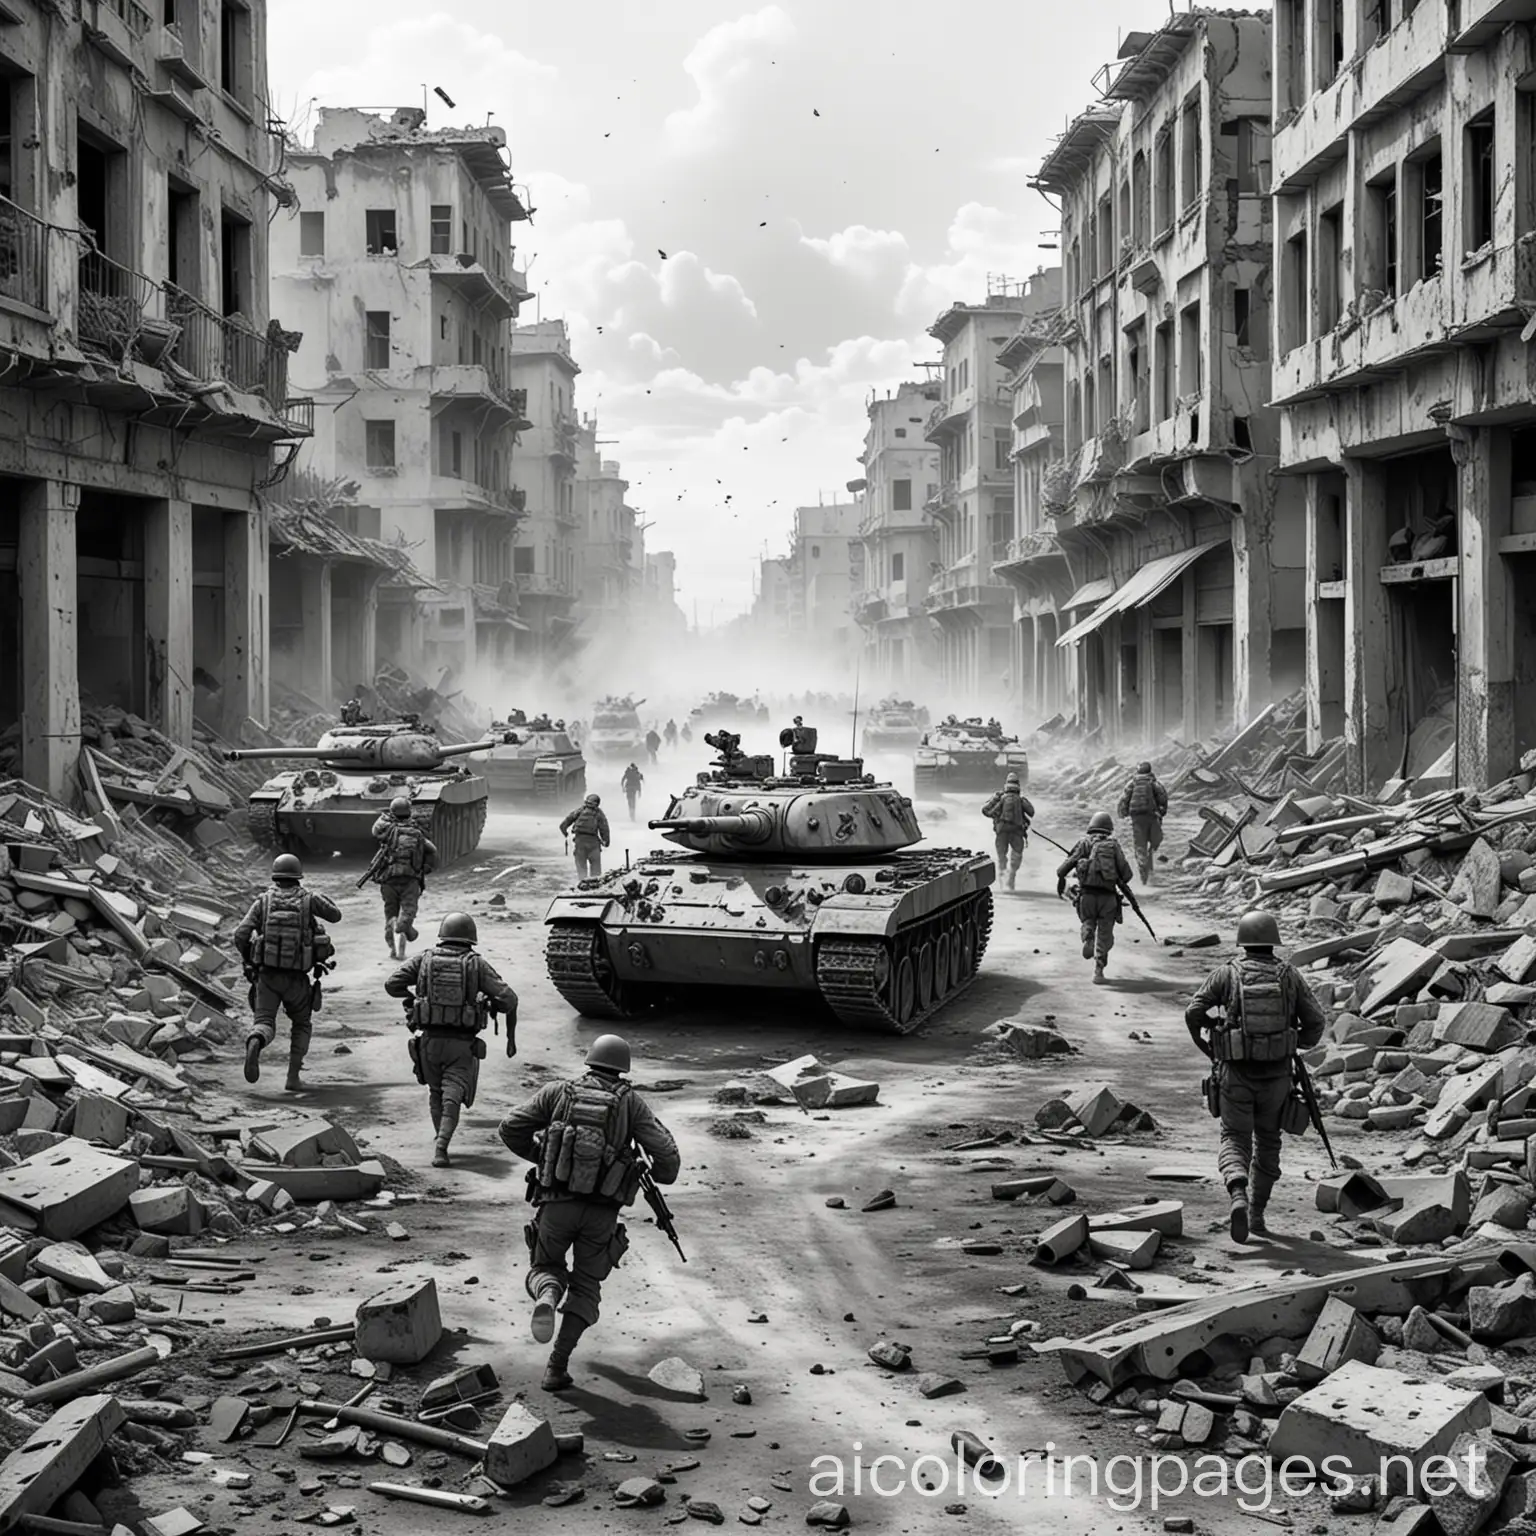 A war, soldiers running and fighting, around dead bodies of people, there are tanks and destroyed city, Coloring Page, black and white, line art, white background, Simplicity, Ample White Space. The background of the coloring page is plain white to make it easy for young children to color within the lines. The outlines of all the subjects are easy to distinguish, making it simple for kids to color without too much difficulty